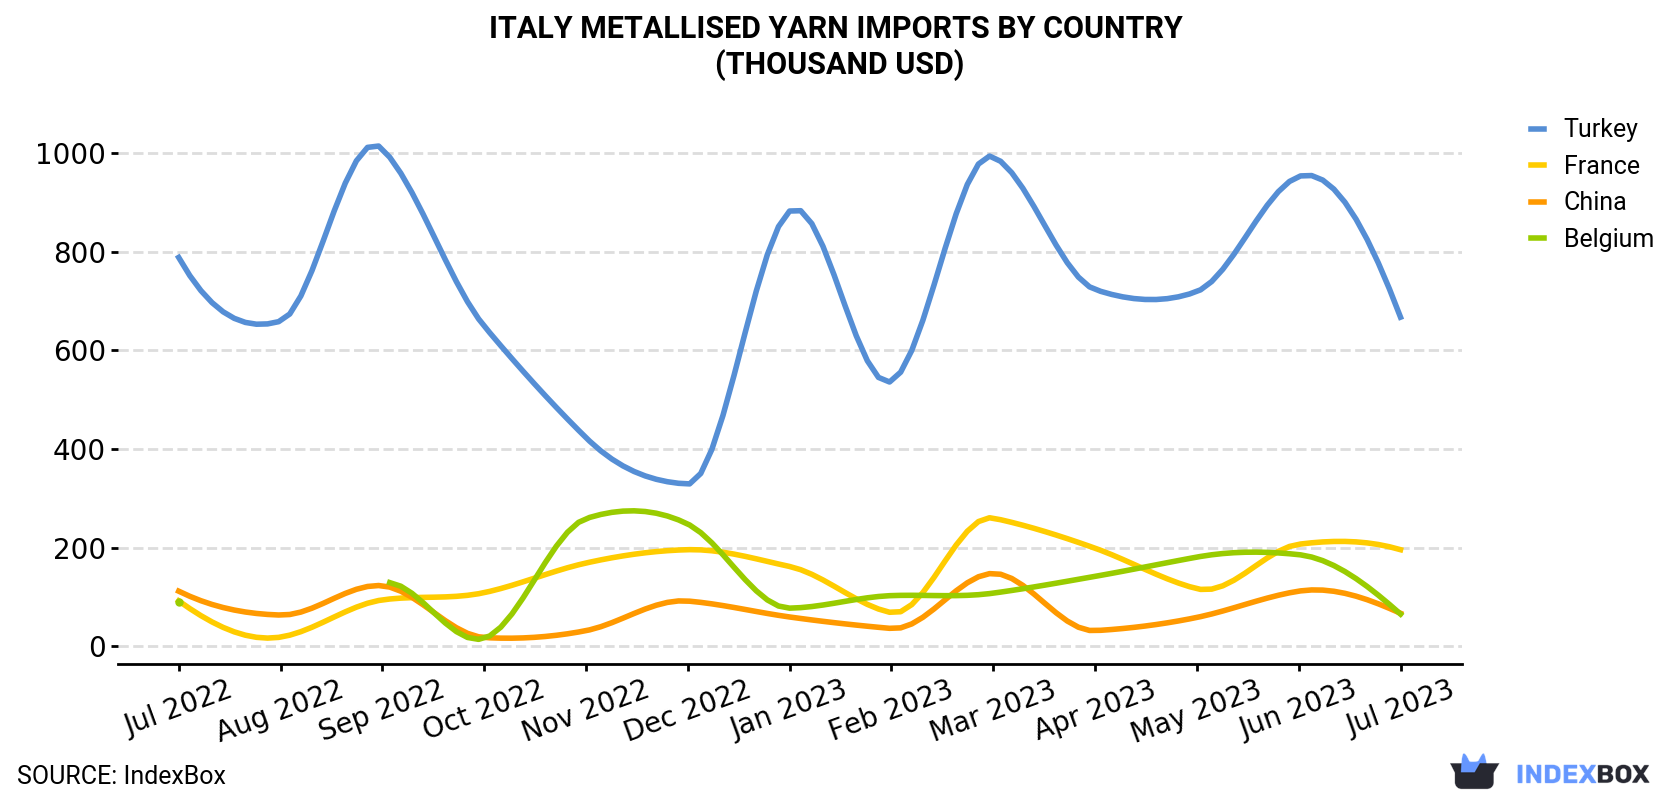 Italy Metallised Yarn Imports By Country (Thousand USD)